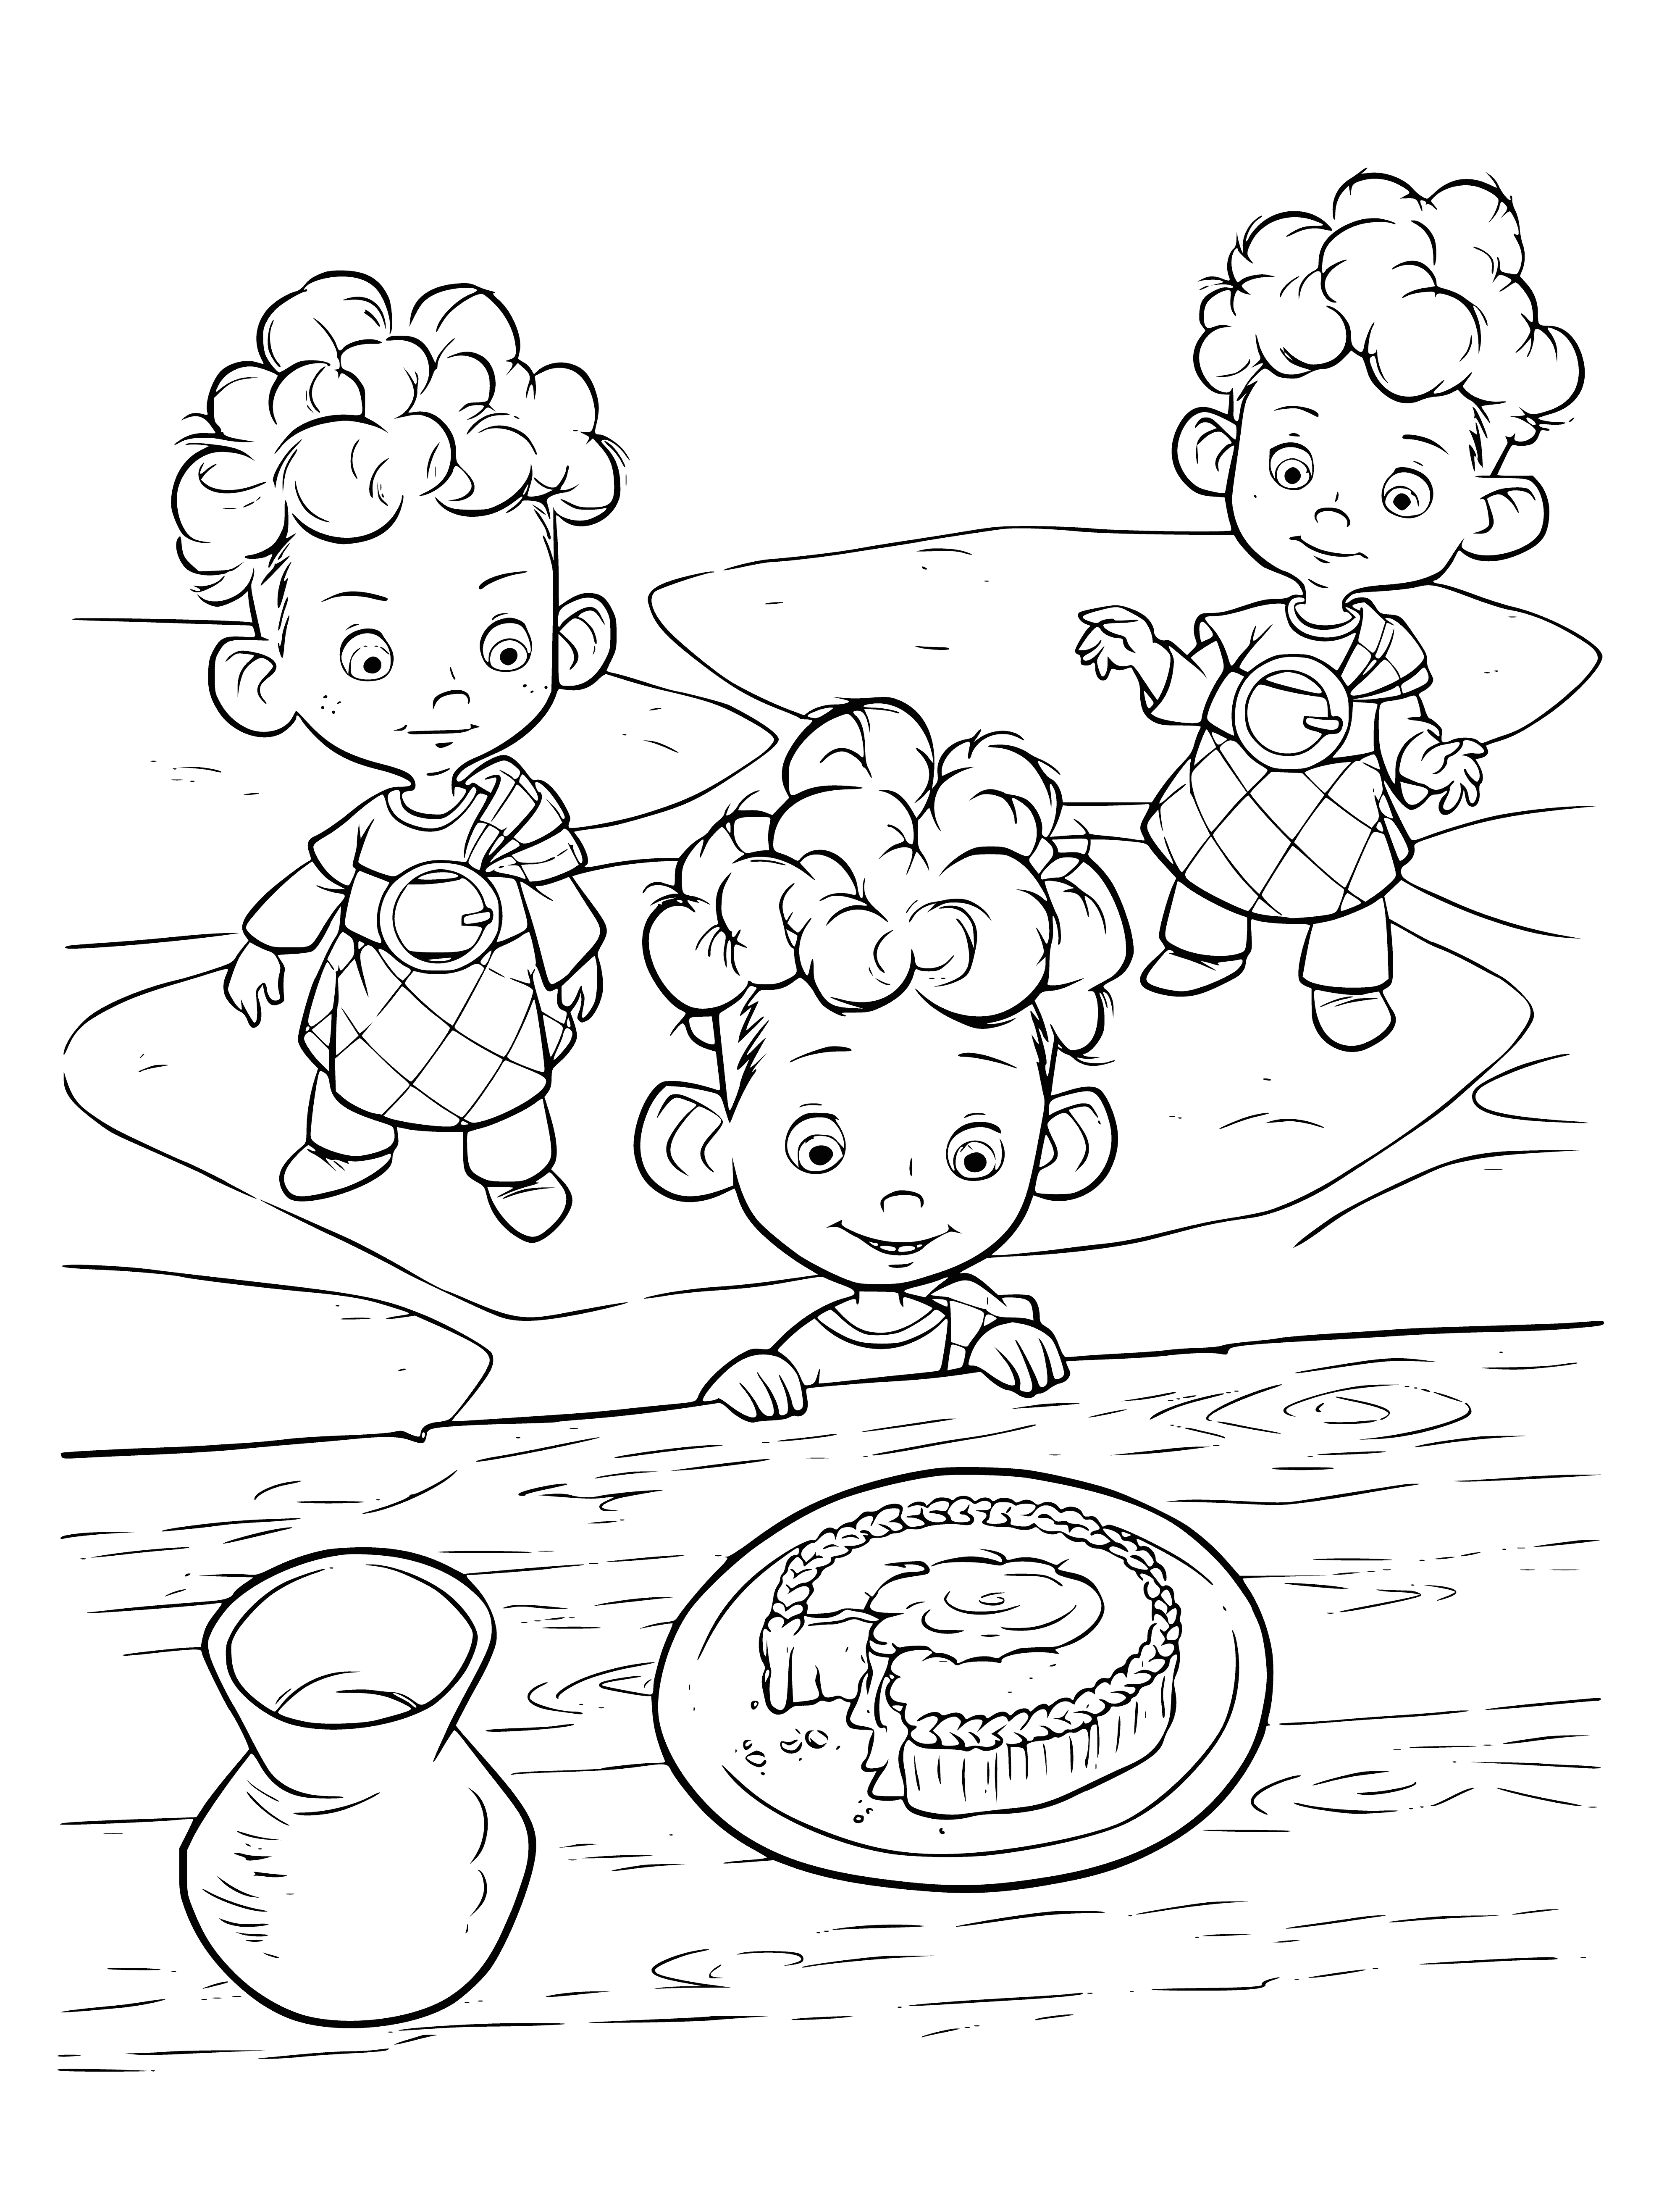 coloring page: 3 kids on a bench in a park wearing orange & holding a daisy, sunflower, & monarch butterfly.